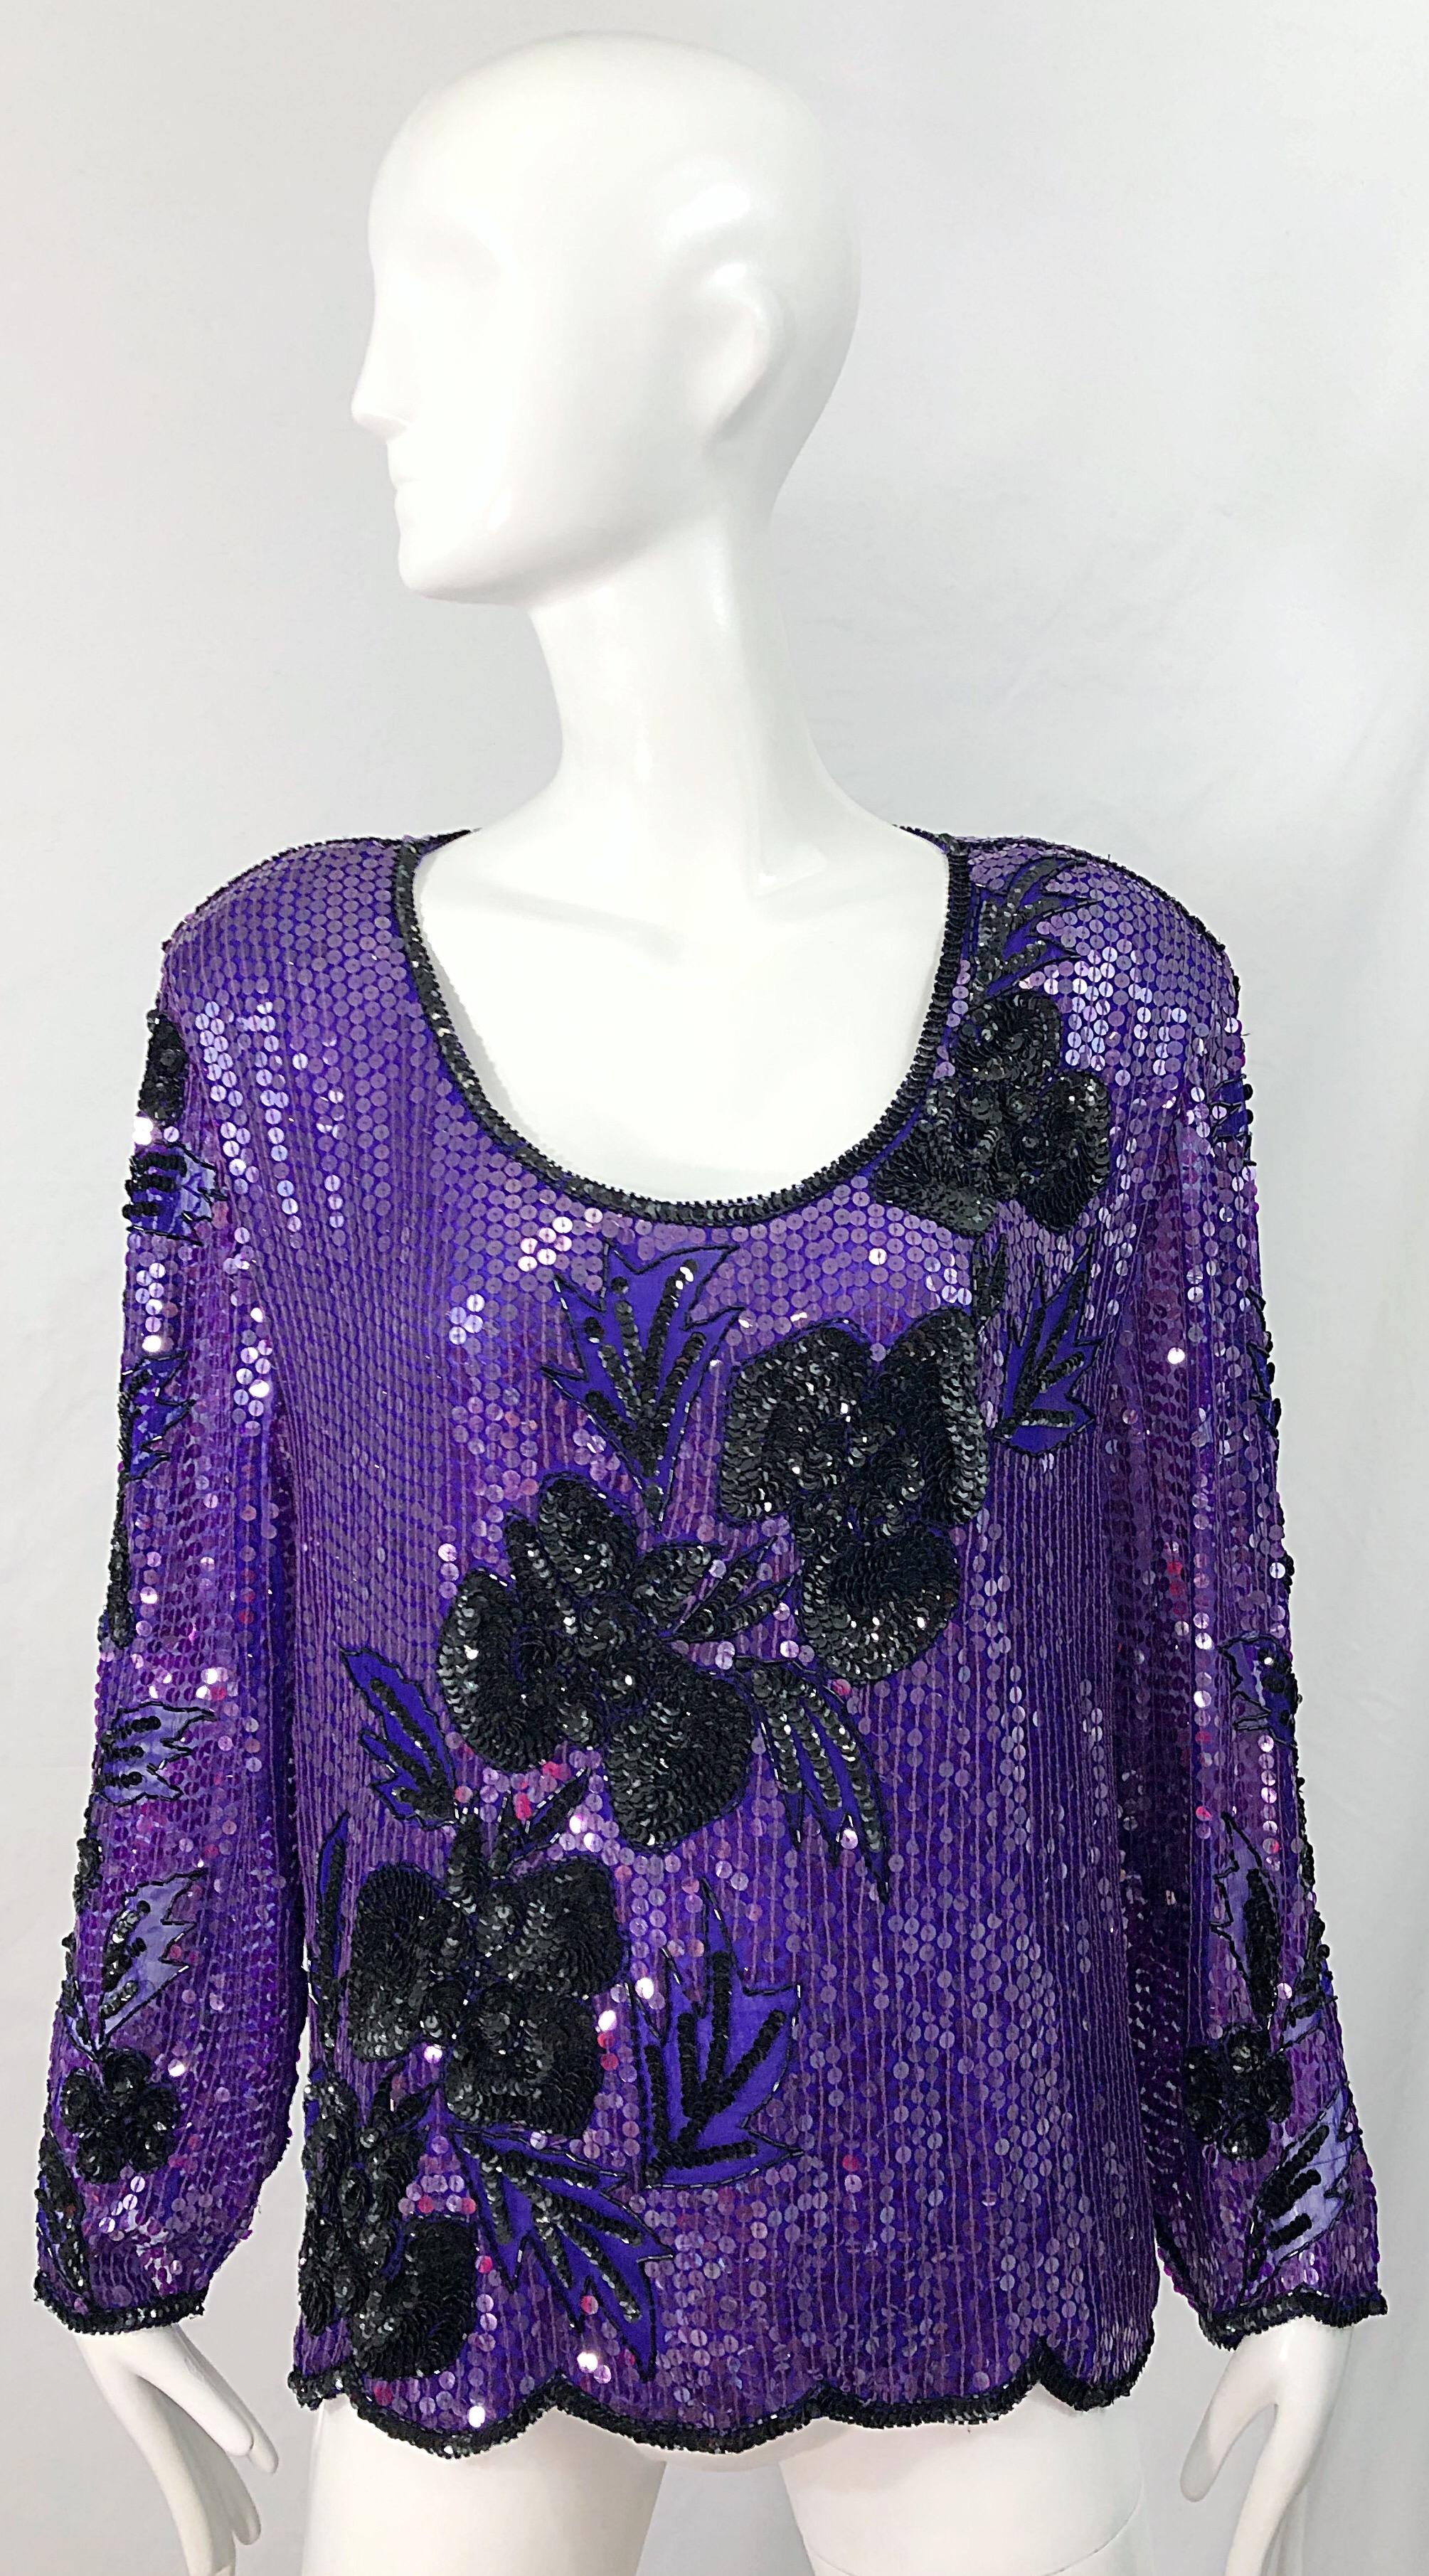 Beautiful early 90s plus size purple and black silk chiffon sequin and beaded long sleeve shirt ! Features thousands of hand-sewn purple sequins and black beads throughout. Scalloped edge hem. Flowers and foliage printed throughout. Simply slips